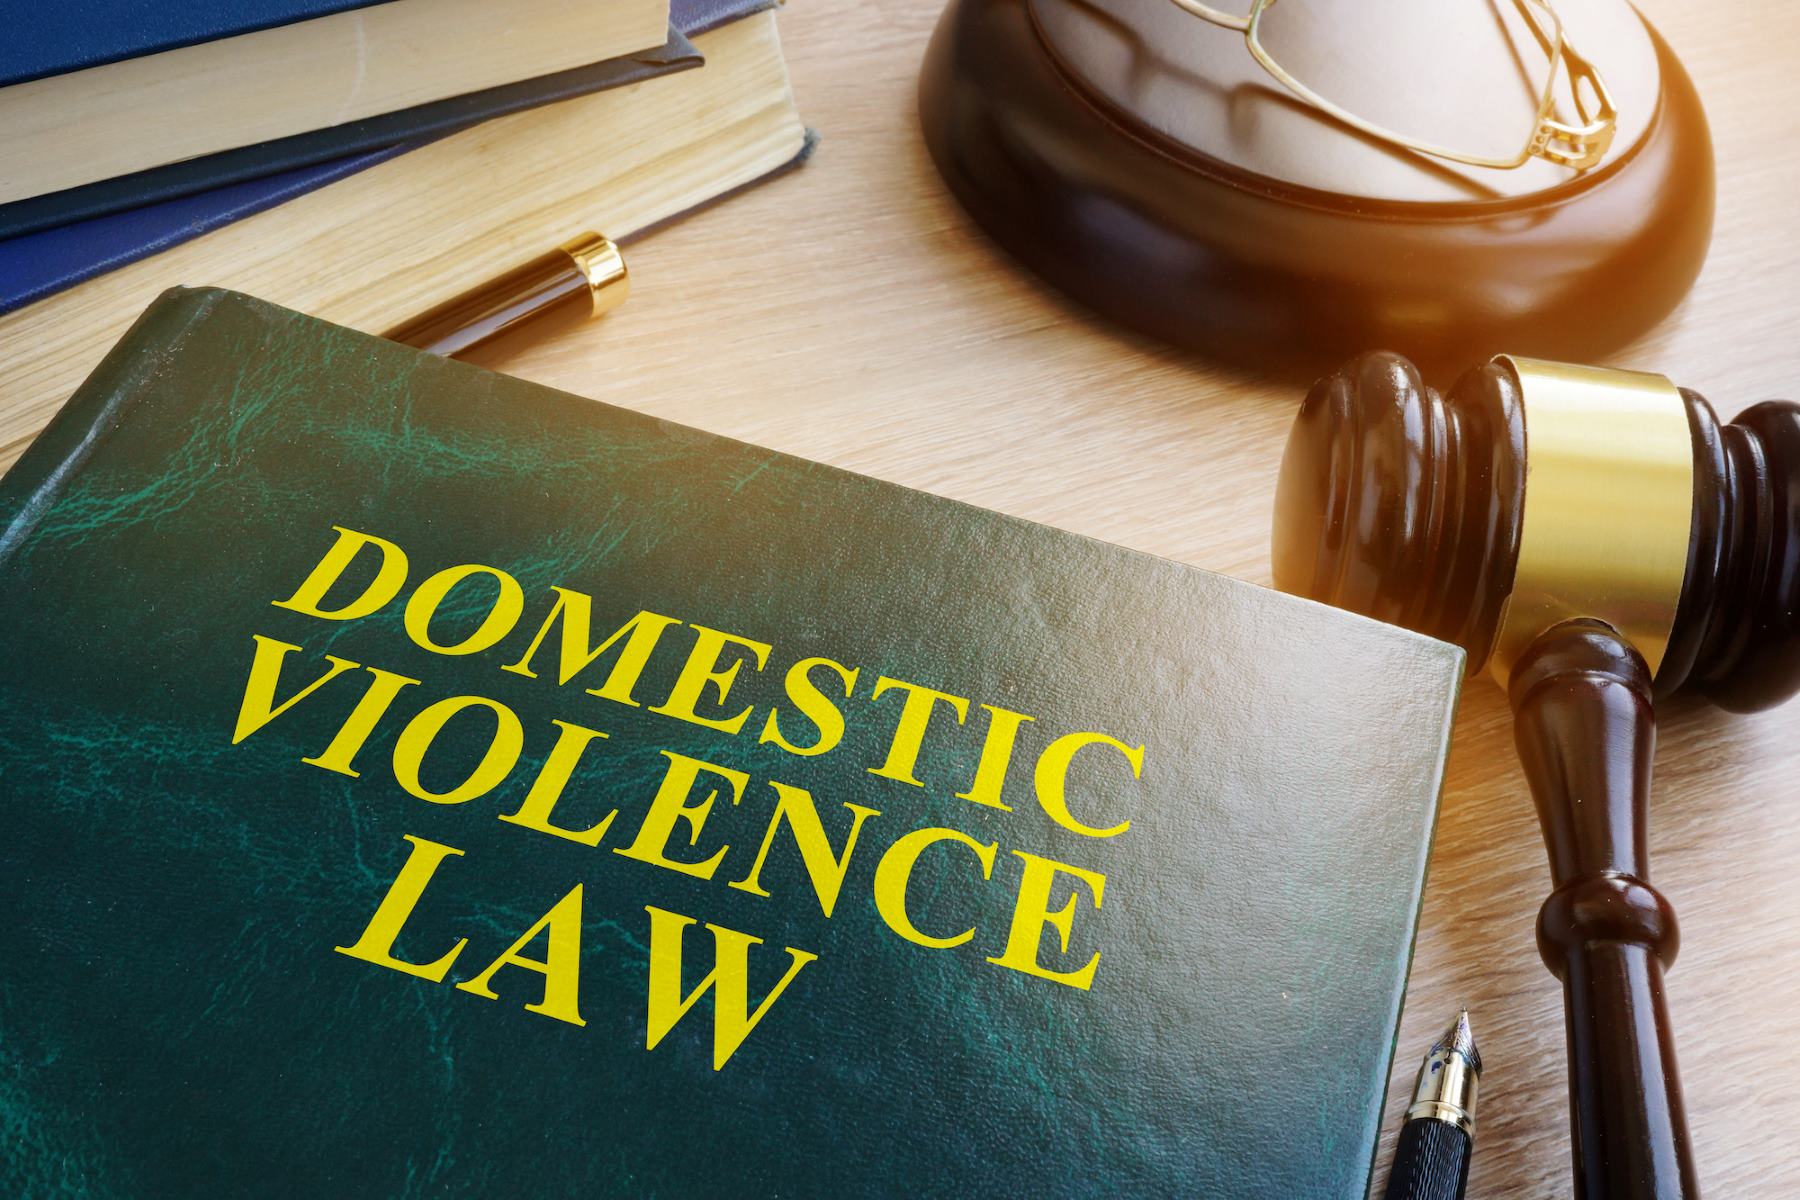 How To Drop Domestic Violence Charges And Lessen The Severity Of The Case With Attorney Representation